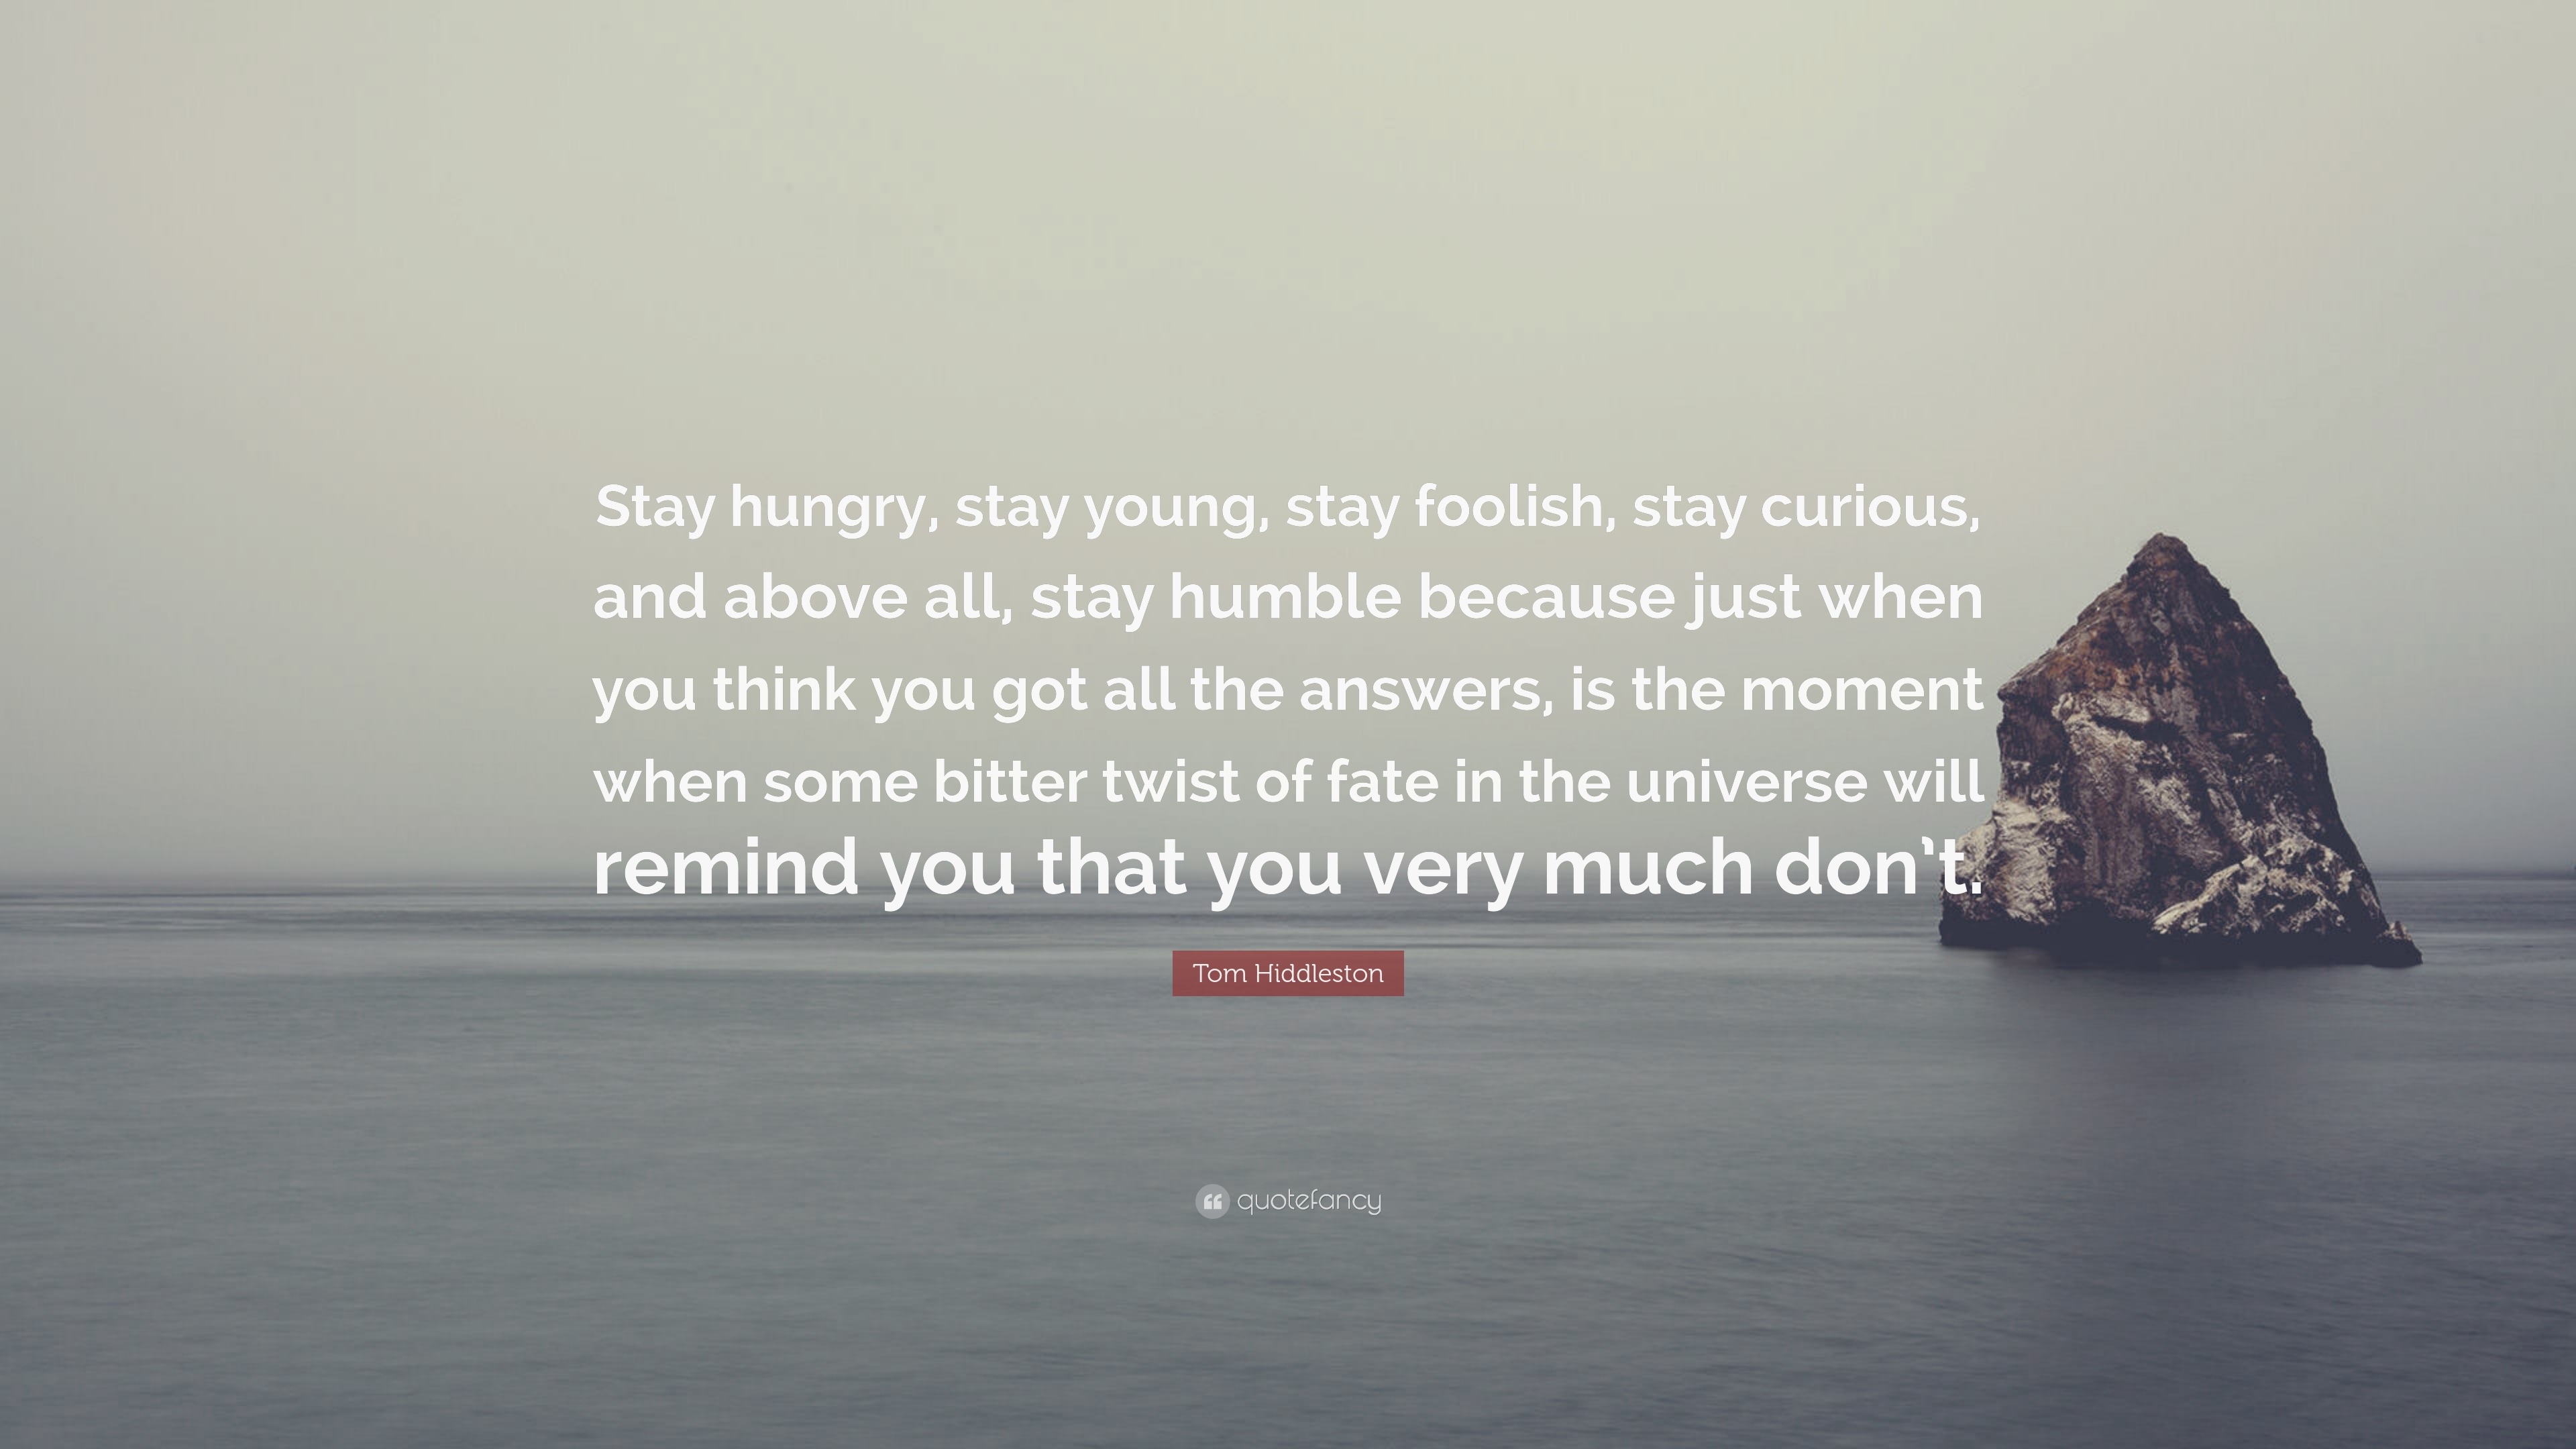 tom hiddleston quote: "stay hungry, stay young, stay foolish